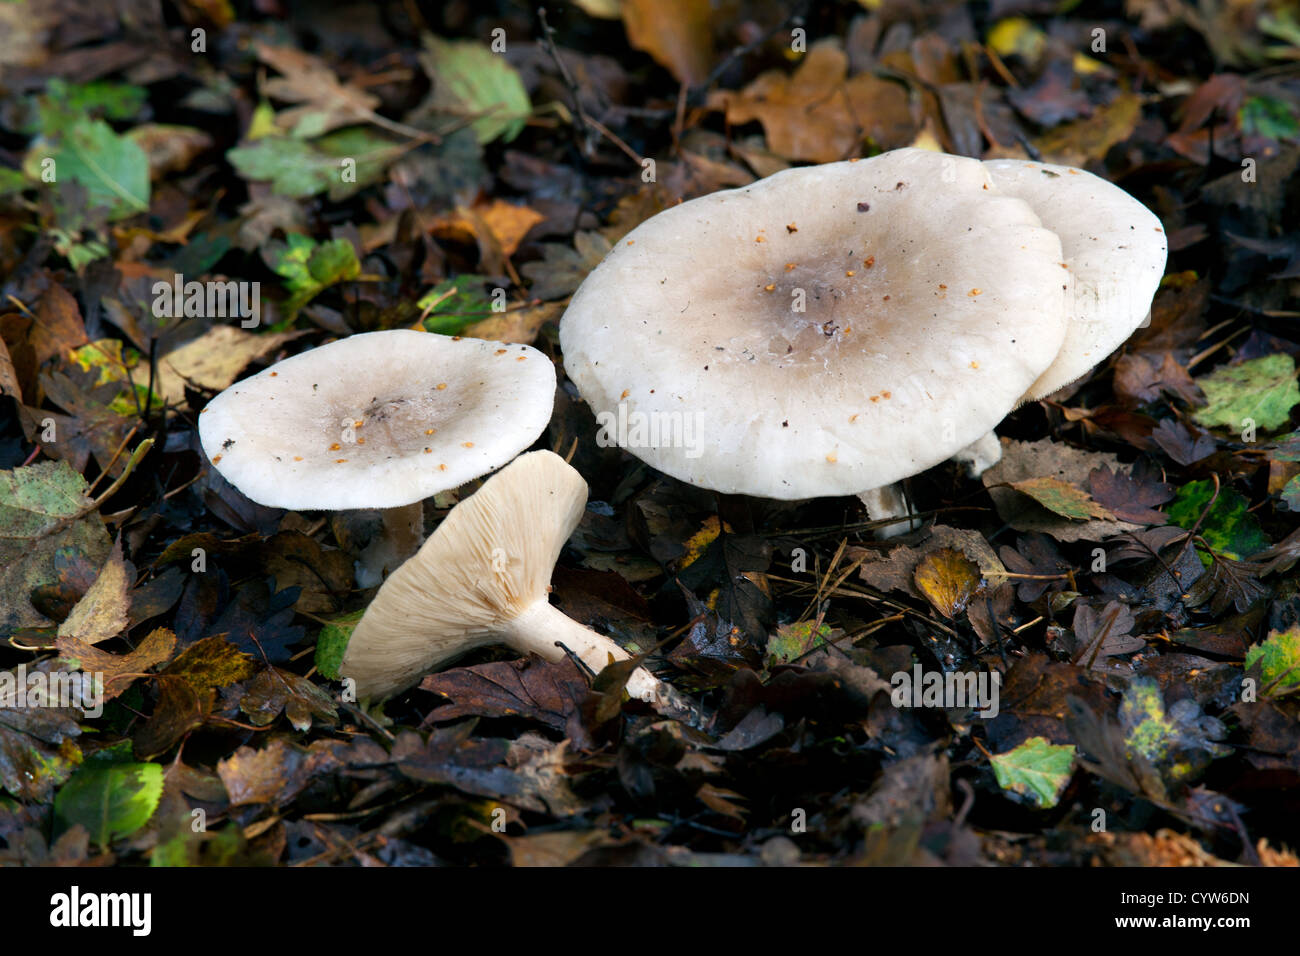 Clouded Funnel (Agaric) Clitocybe nrbularis fungi fruiting bodies growing in leaf litter Stock Photo